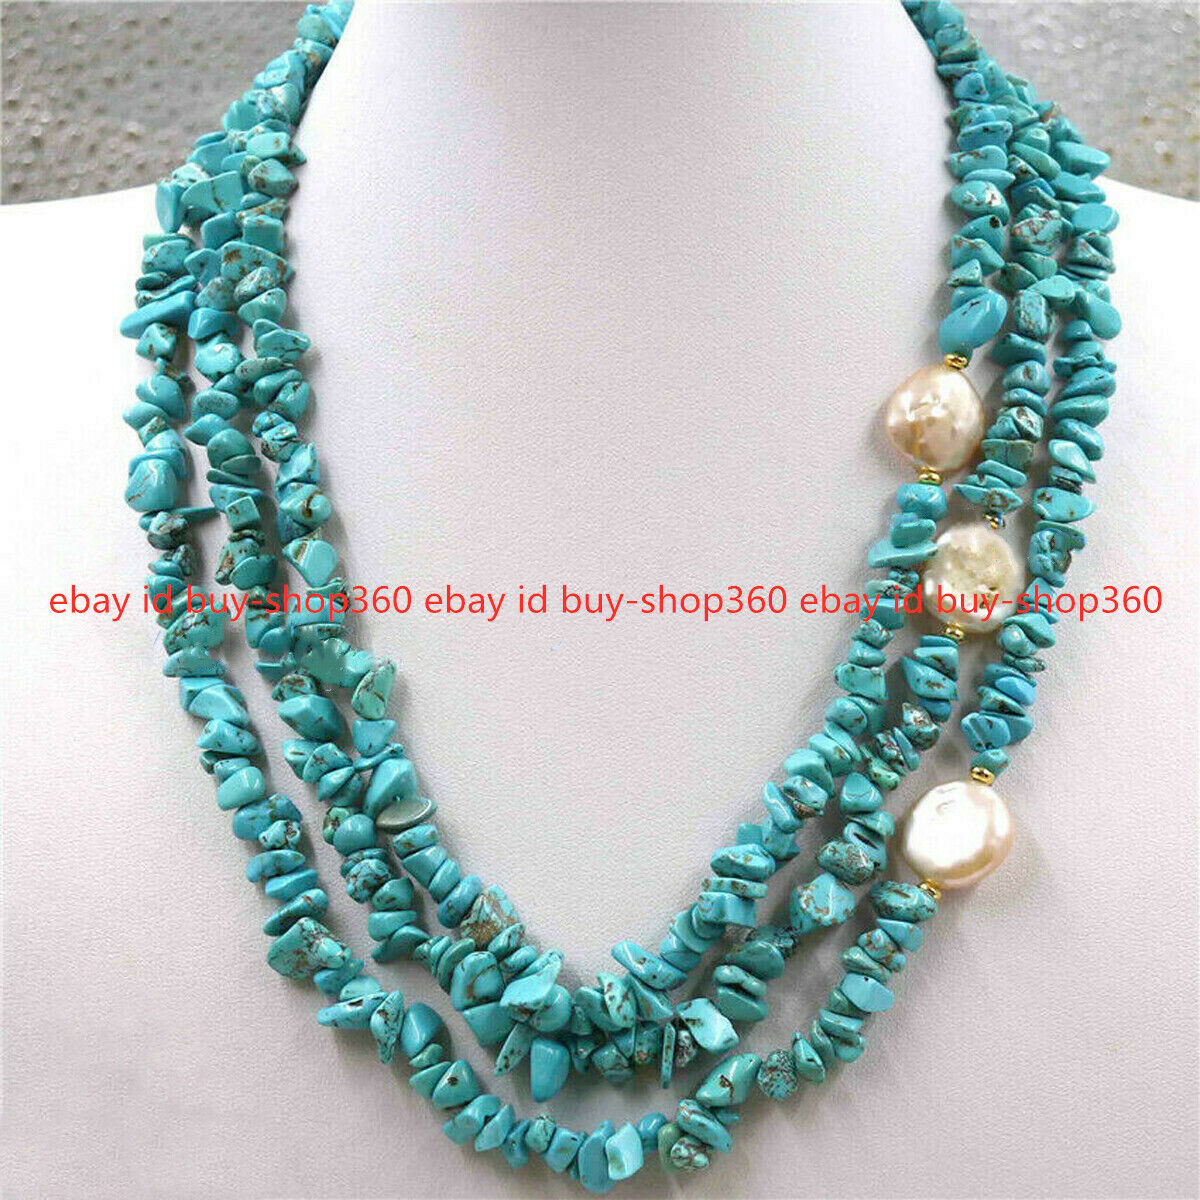 3Rows Natural Blue Turquoise Gems White Baroque Pearls Cluster Necklace 18-20\'\'